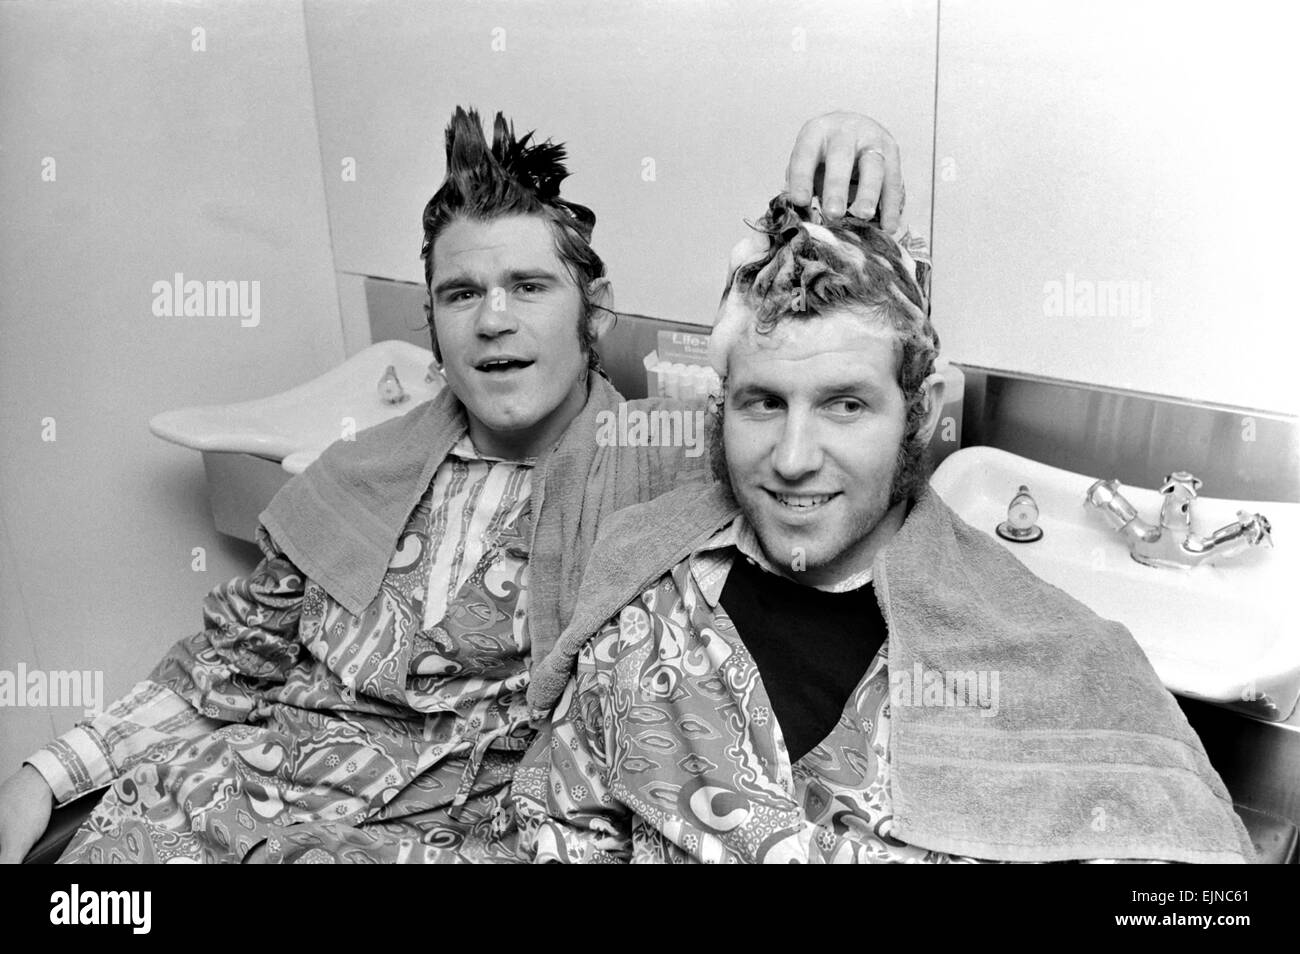 Football fan Vidal Sassoon made a solemn promise that if Chelsea reached the final of the Football League Cup the players and their wives would all get a free hair-dofor the occasion. Chelsea are in the Final and Vidal kept this promise. Chelsea players David Webb and Peter Osgood seen getting the shampoo treatment at Vidal Sassoon's. March 1972 72-2010-006 Stock Photo